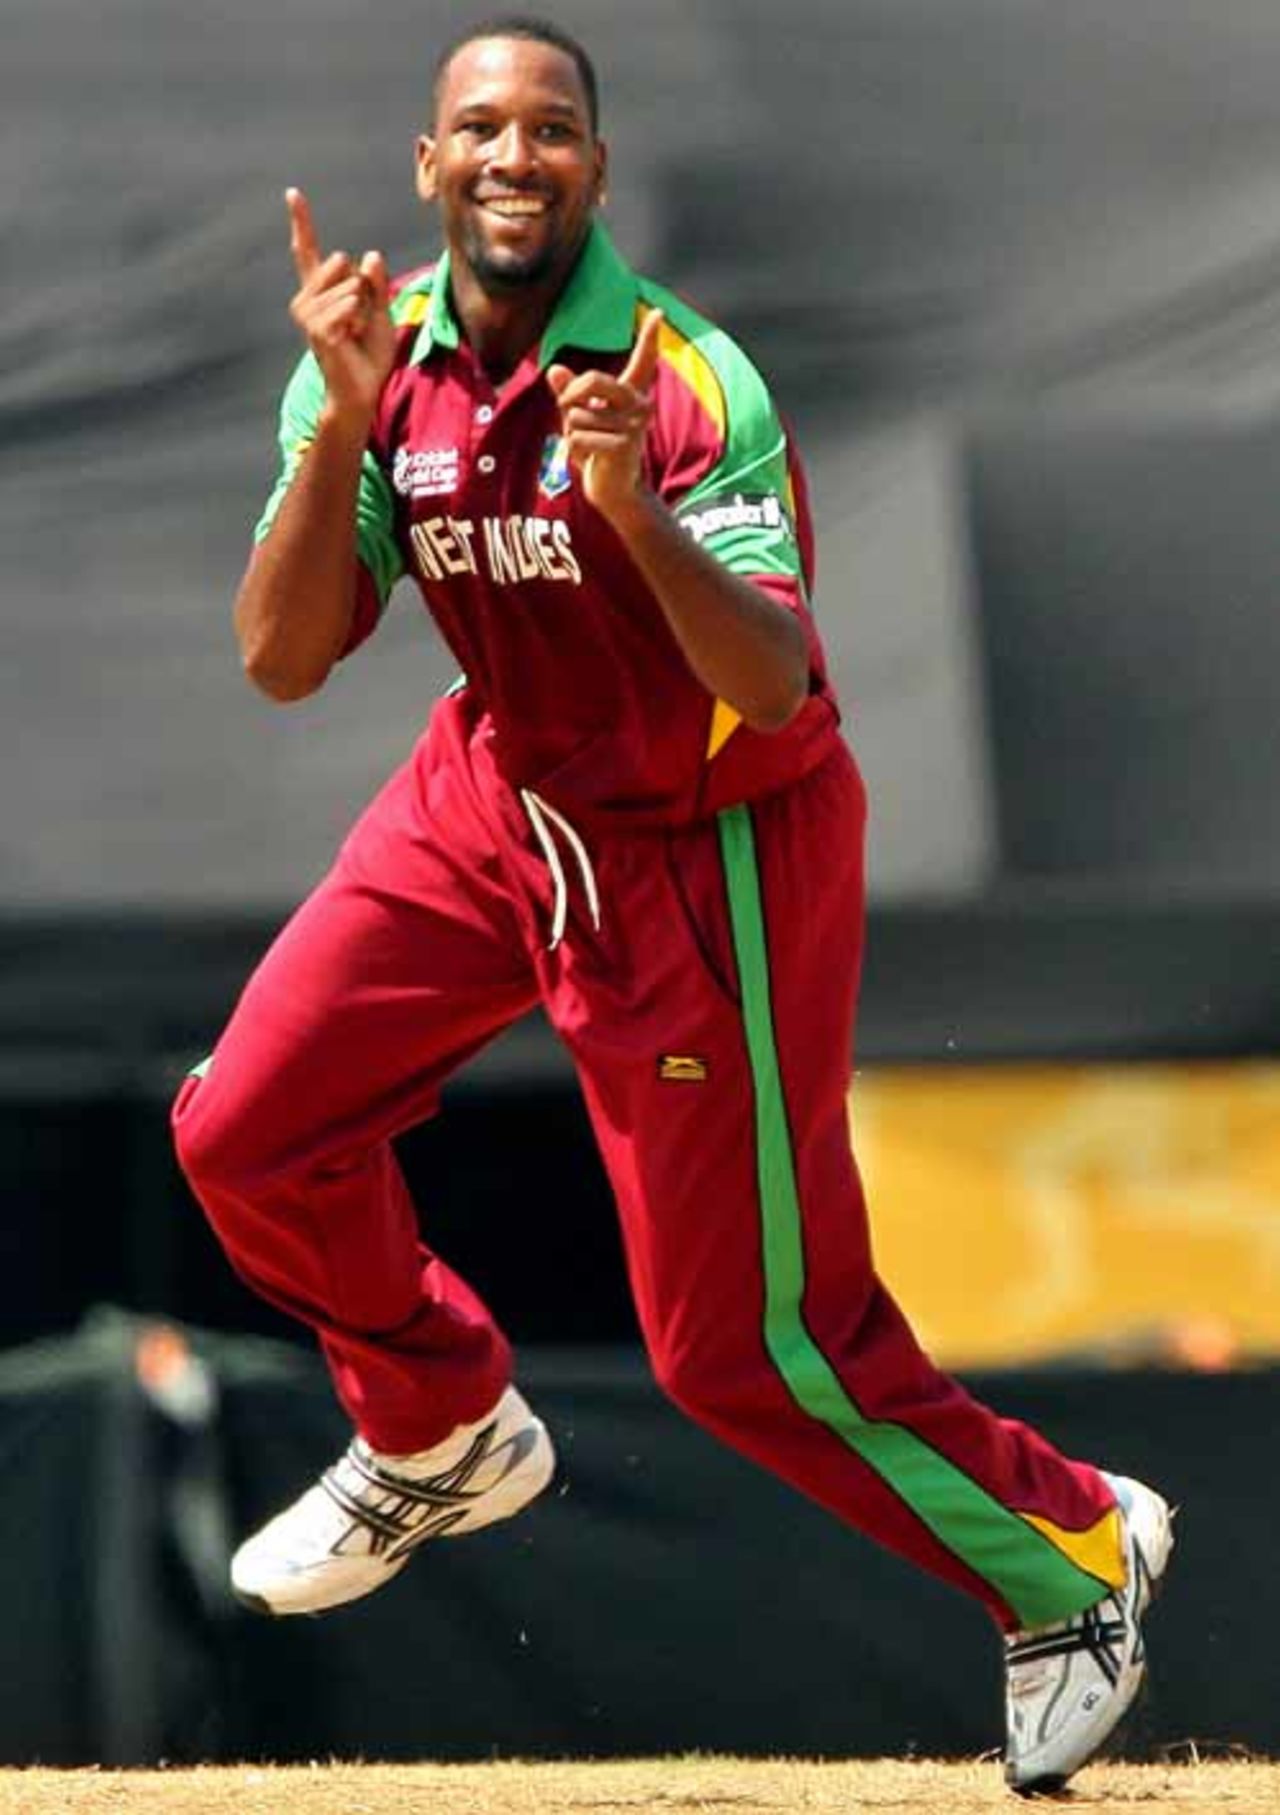 Corey Collymore celebrates  the wicket of Graeme Smith, West Indies v South Africa, Super Eights, World Cup, Grenada, April 10, 2007